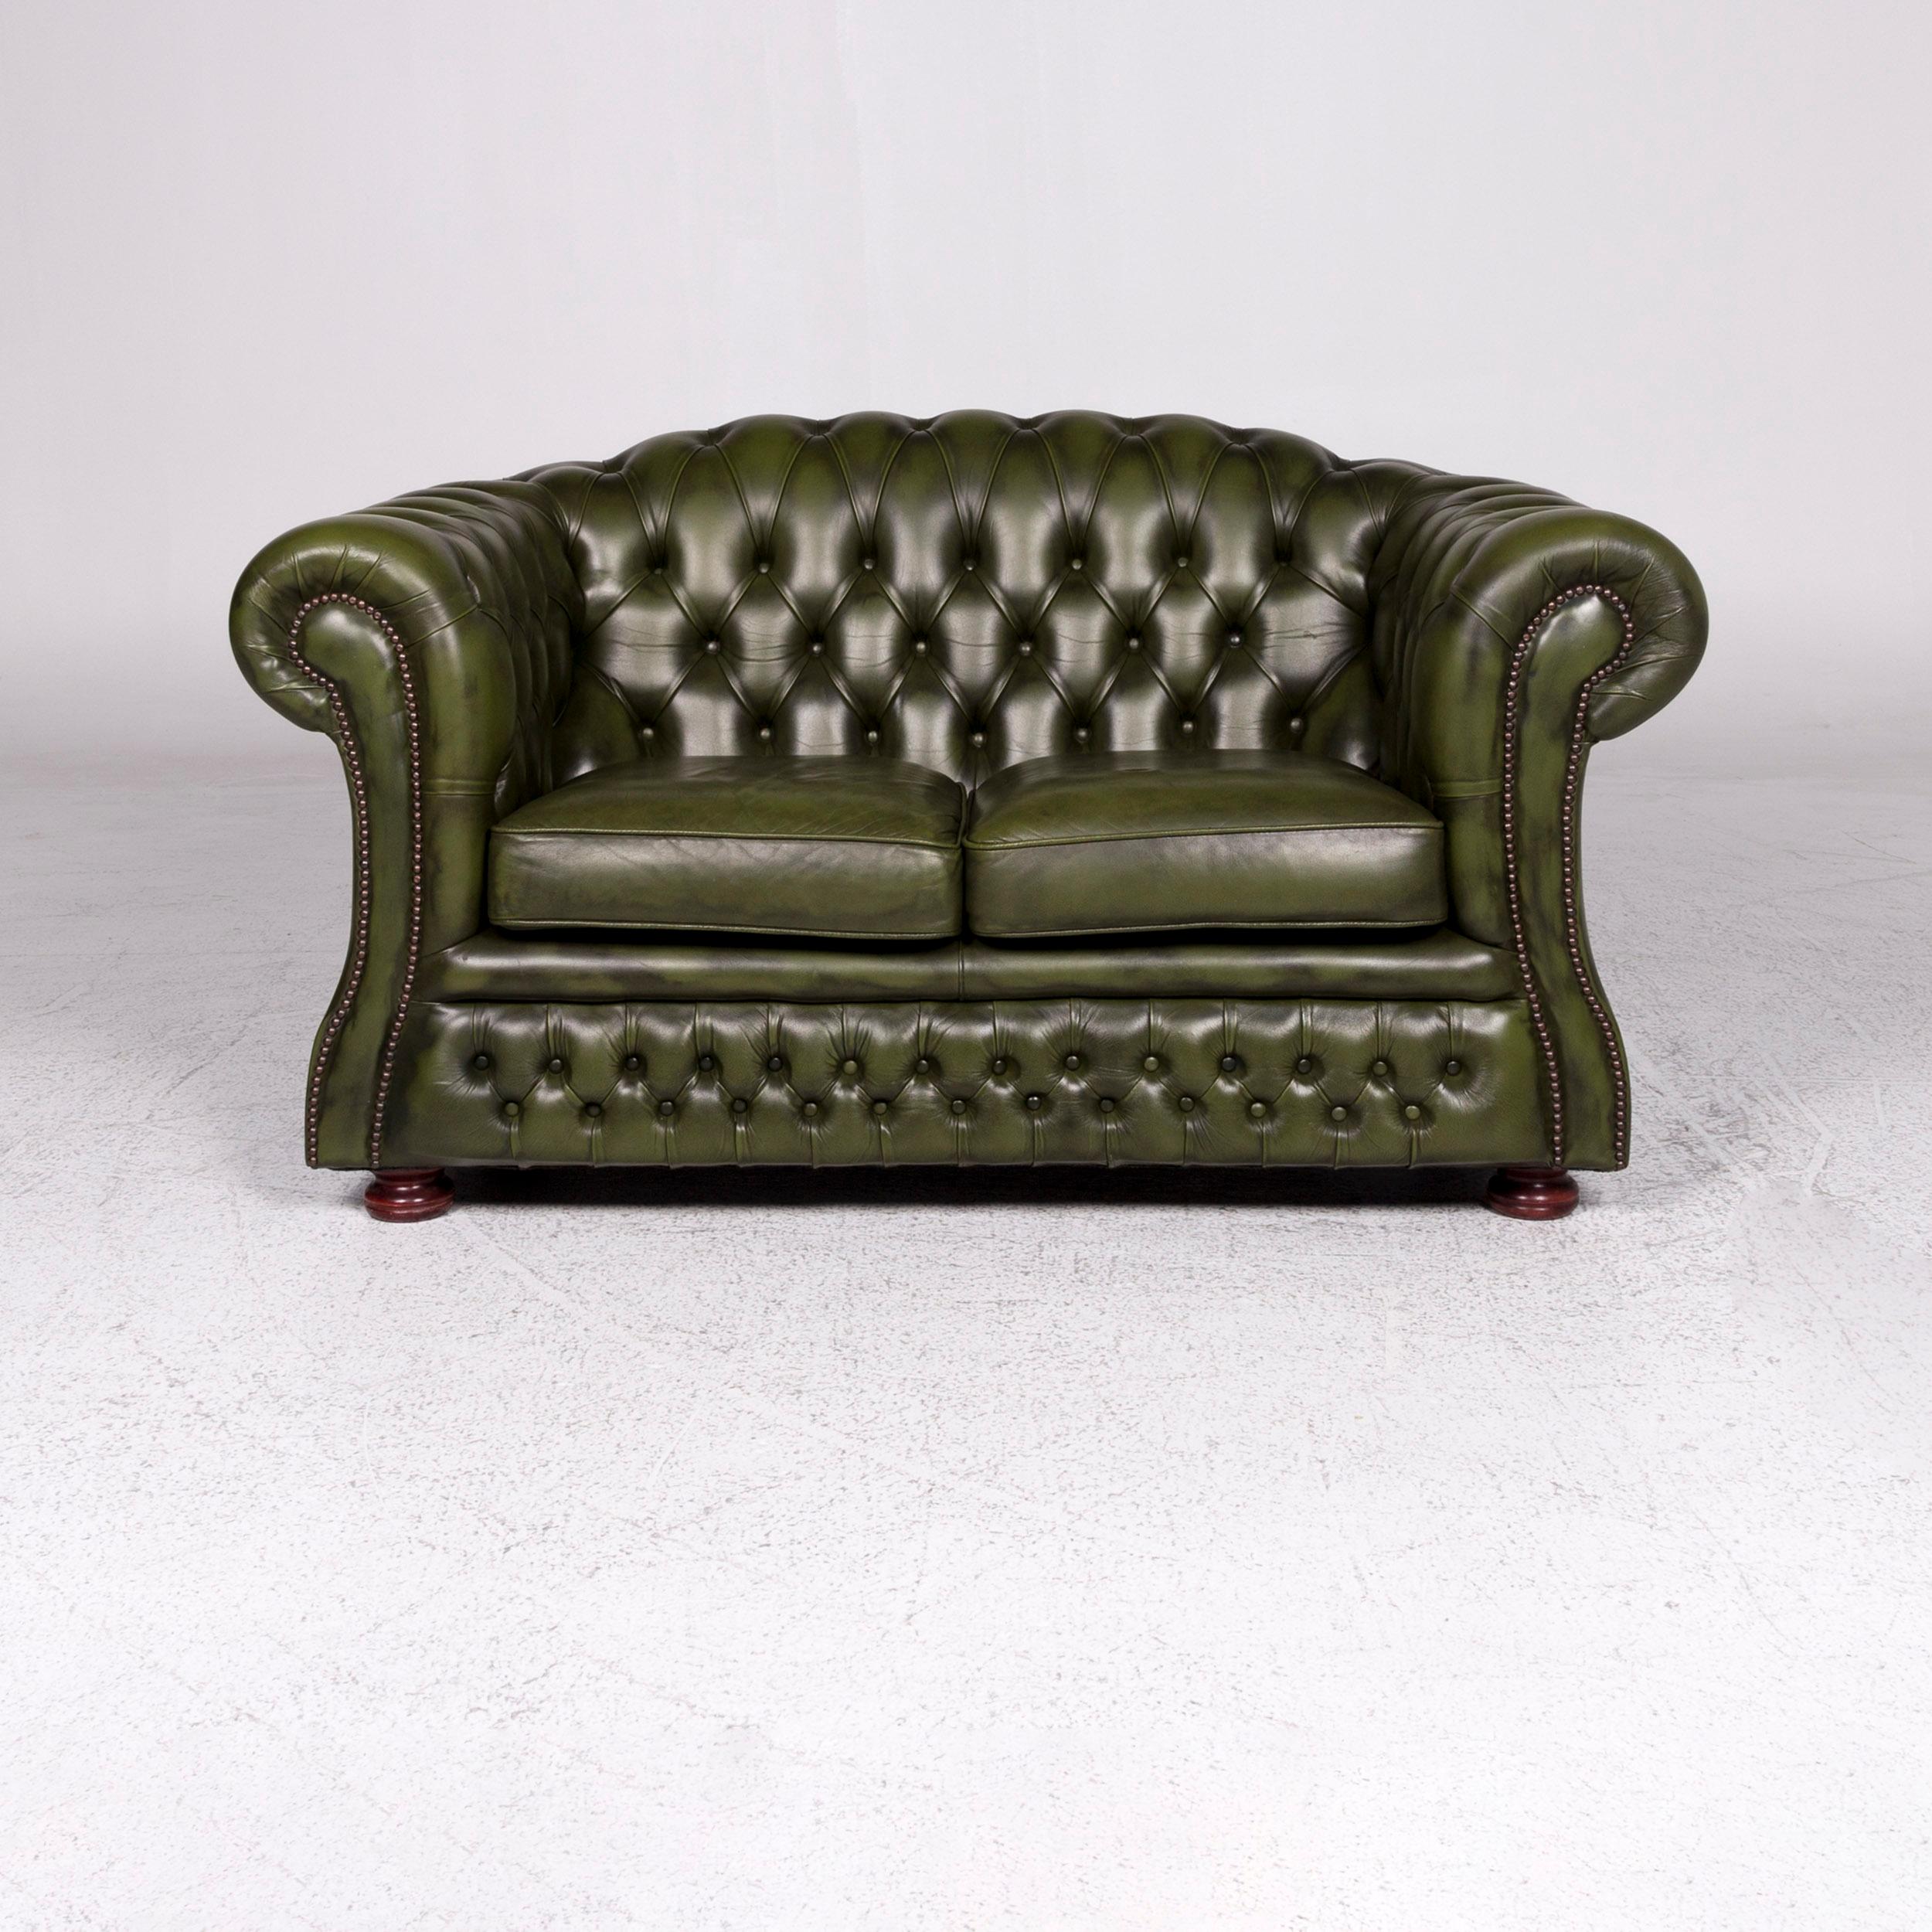 We bring to you a Chesterfield leather sofa green two-seat retro couch.
 
 Product measurements in centimeters:
 
 depth 92
 width 153
 height 84
 seat-height 46
 rest-height 74
 seat-depth 58
 seat-width 96
 back-height 40.

  